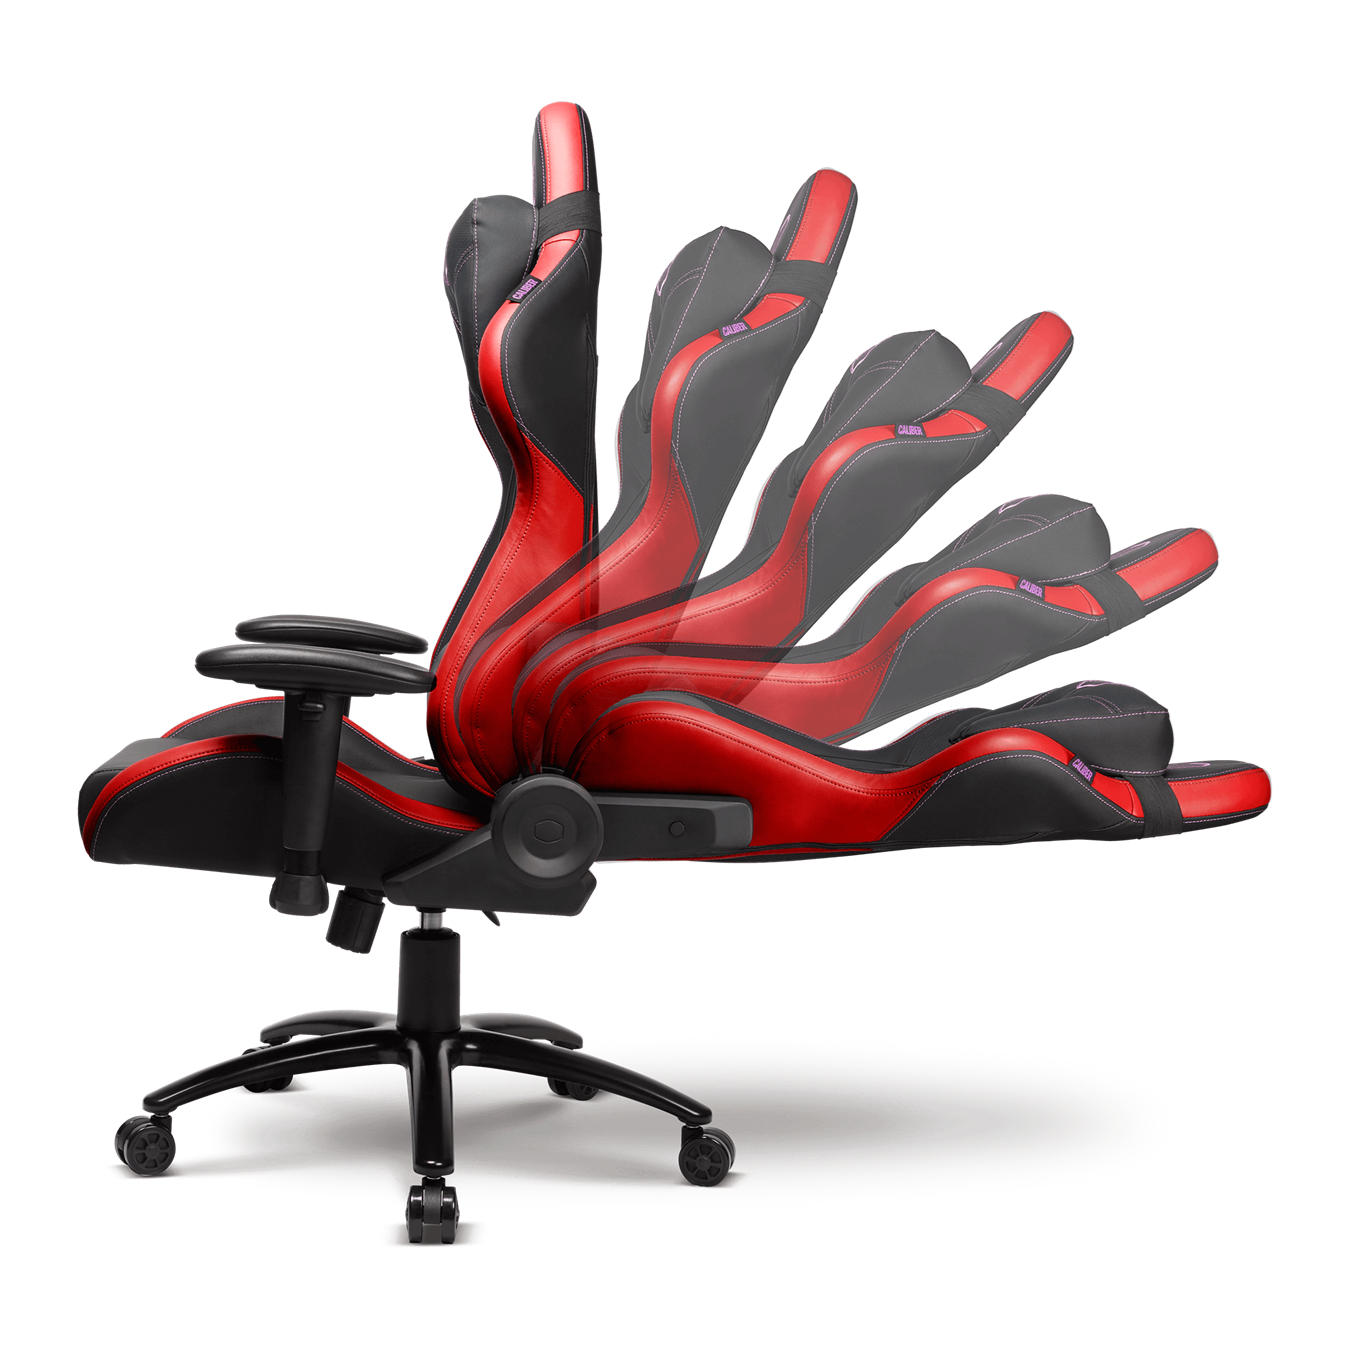 Cooler Master Caliber R2 Gaming Chair - Black/Red